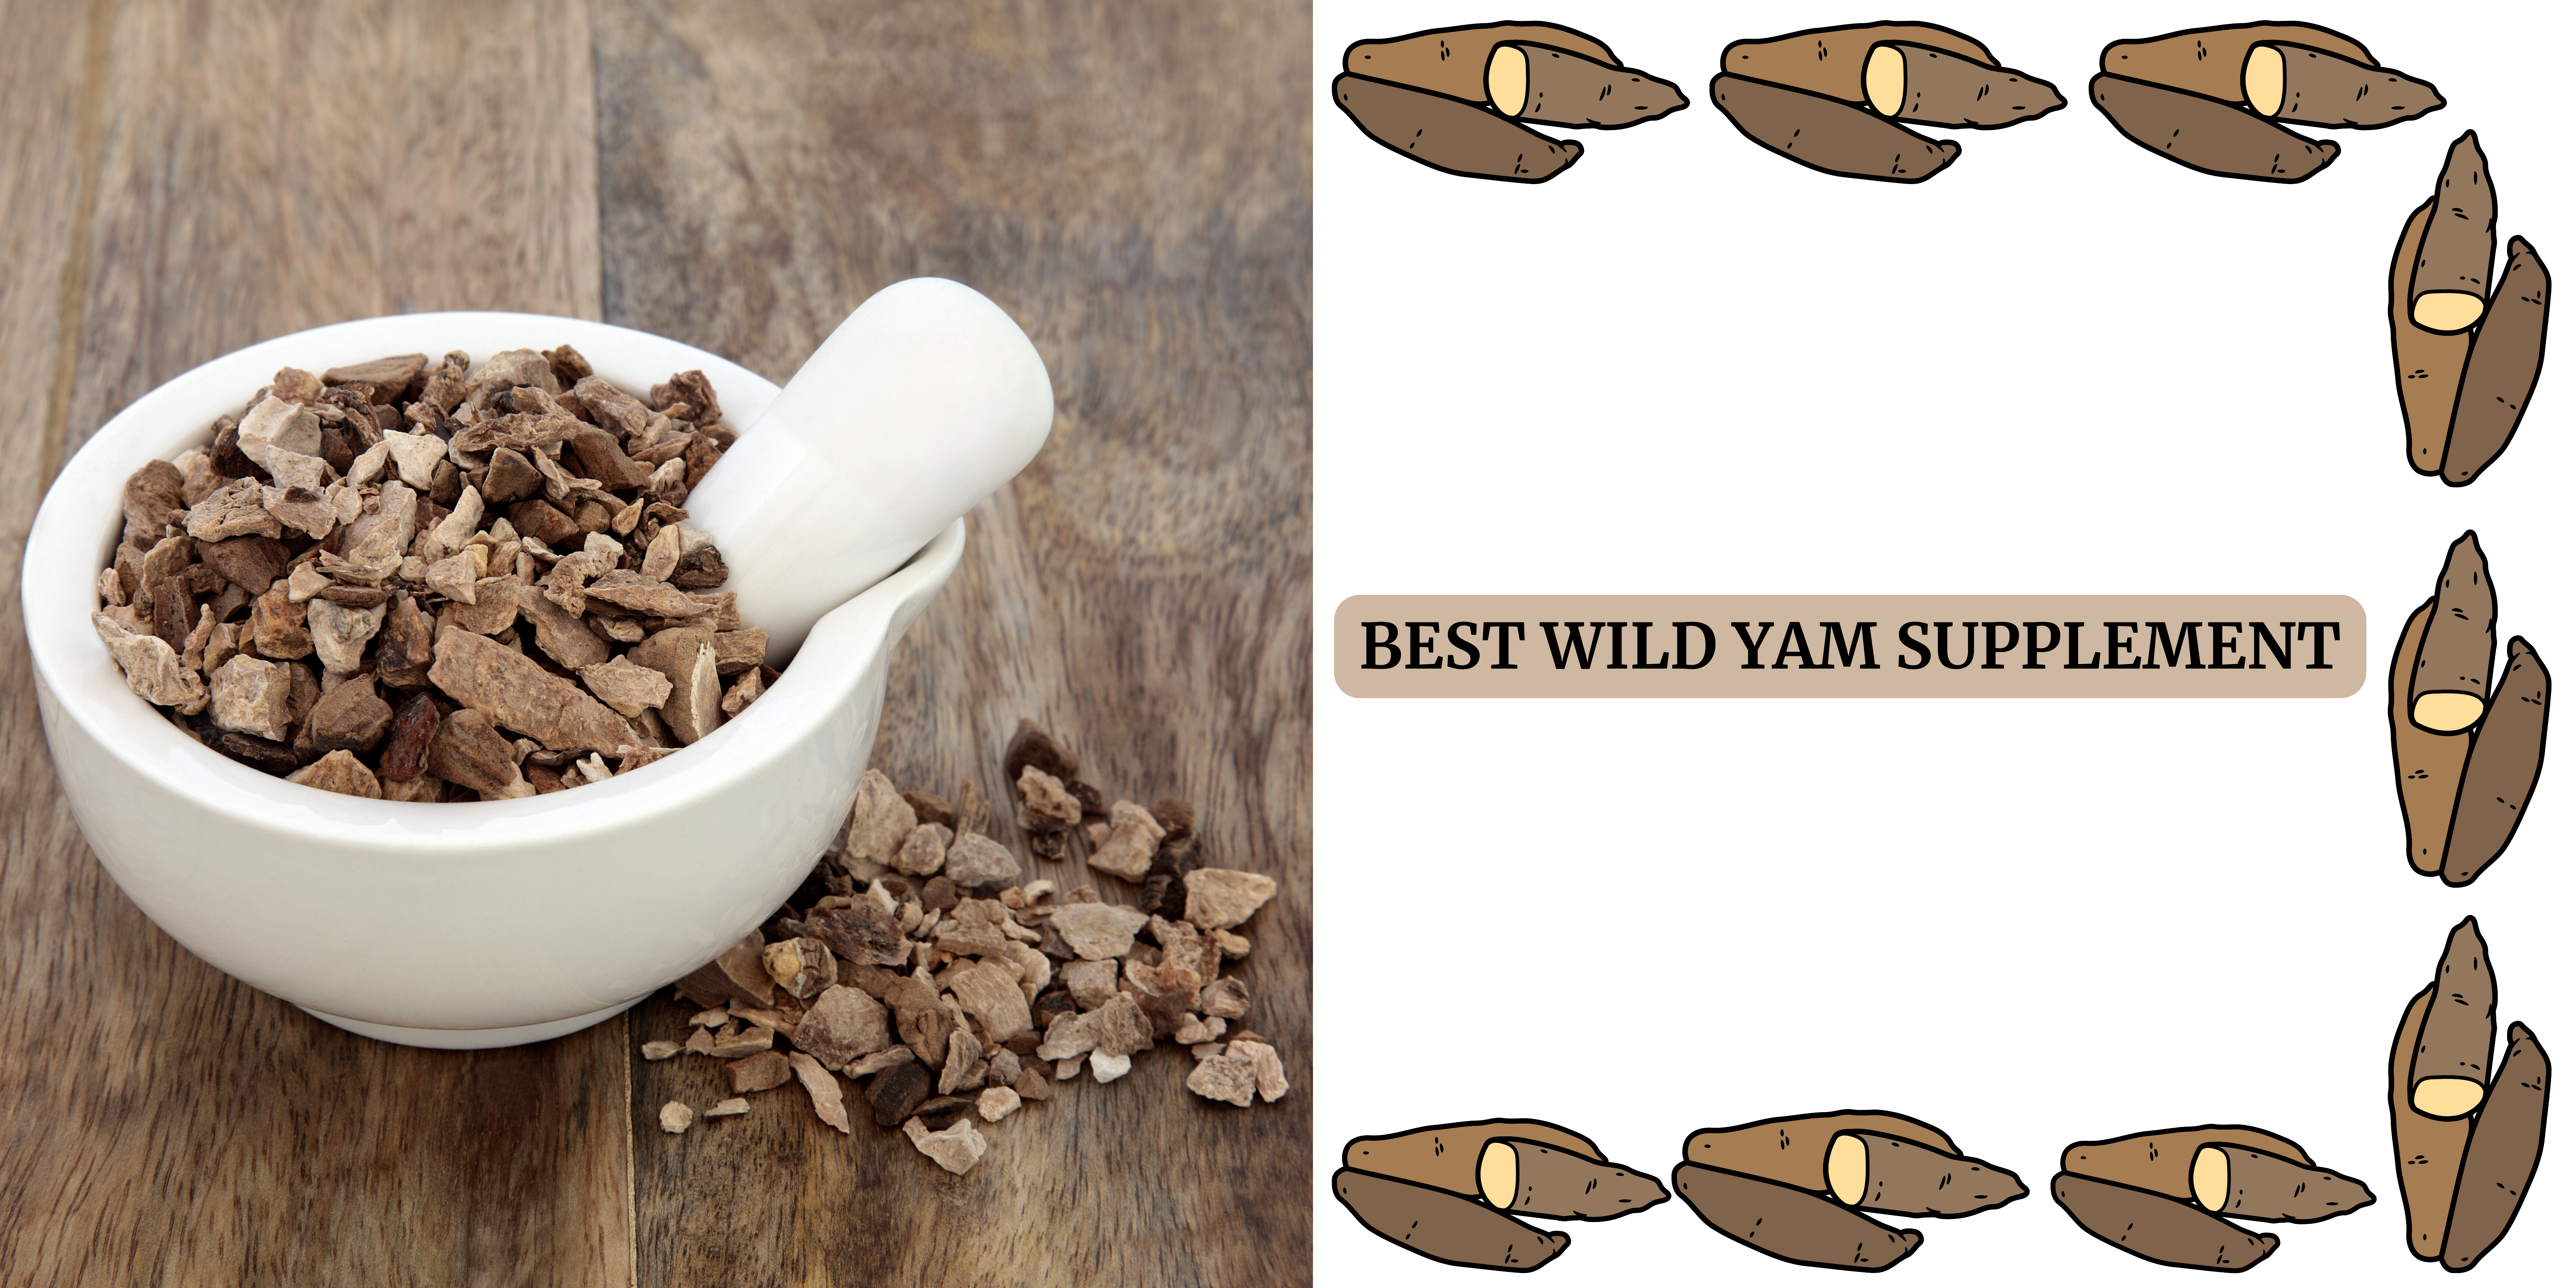 Wild Yam Supplement in India